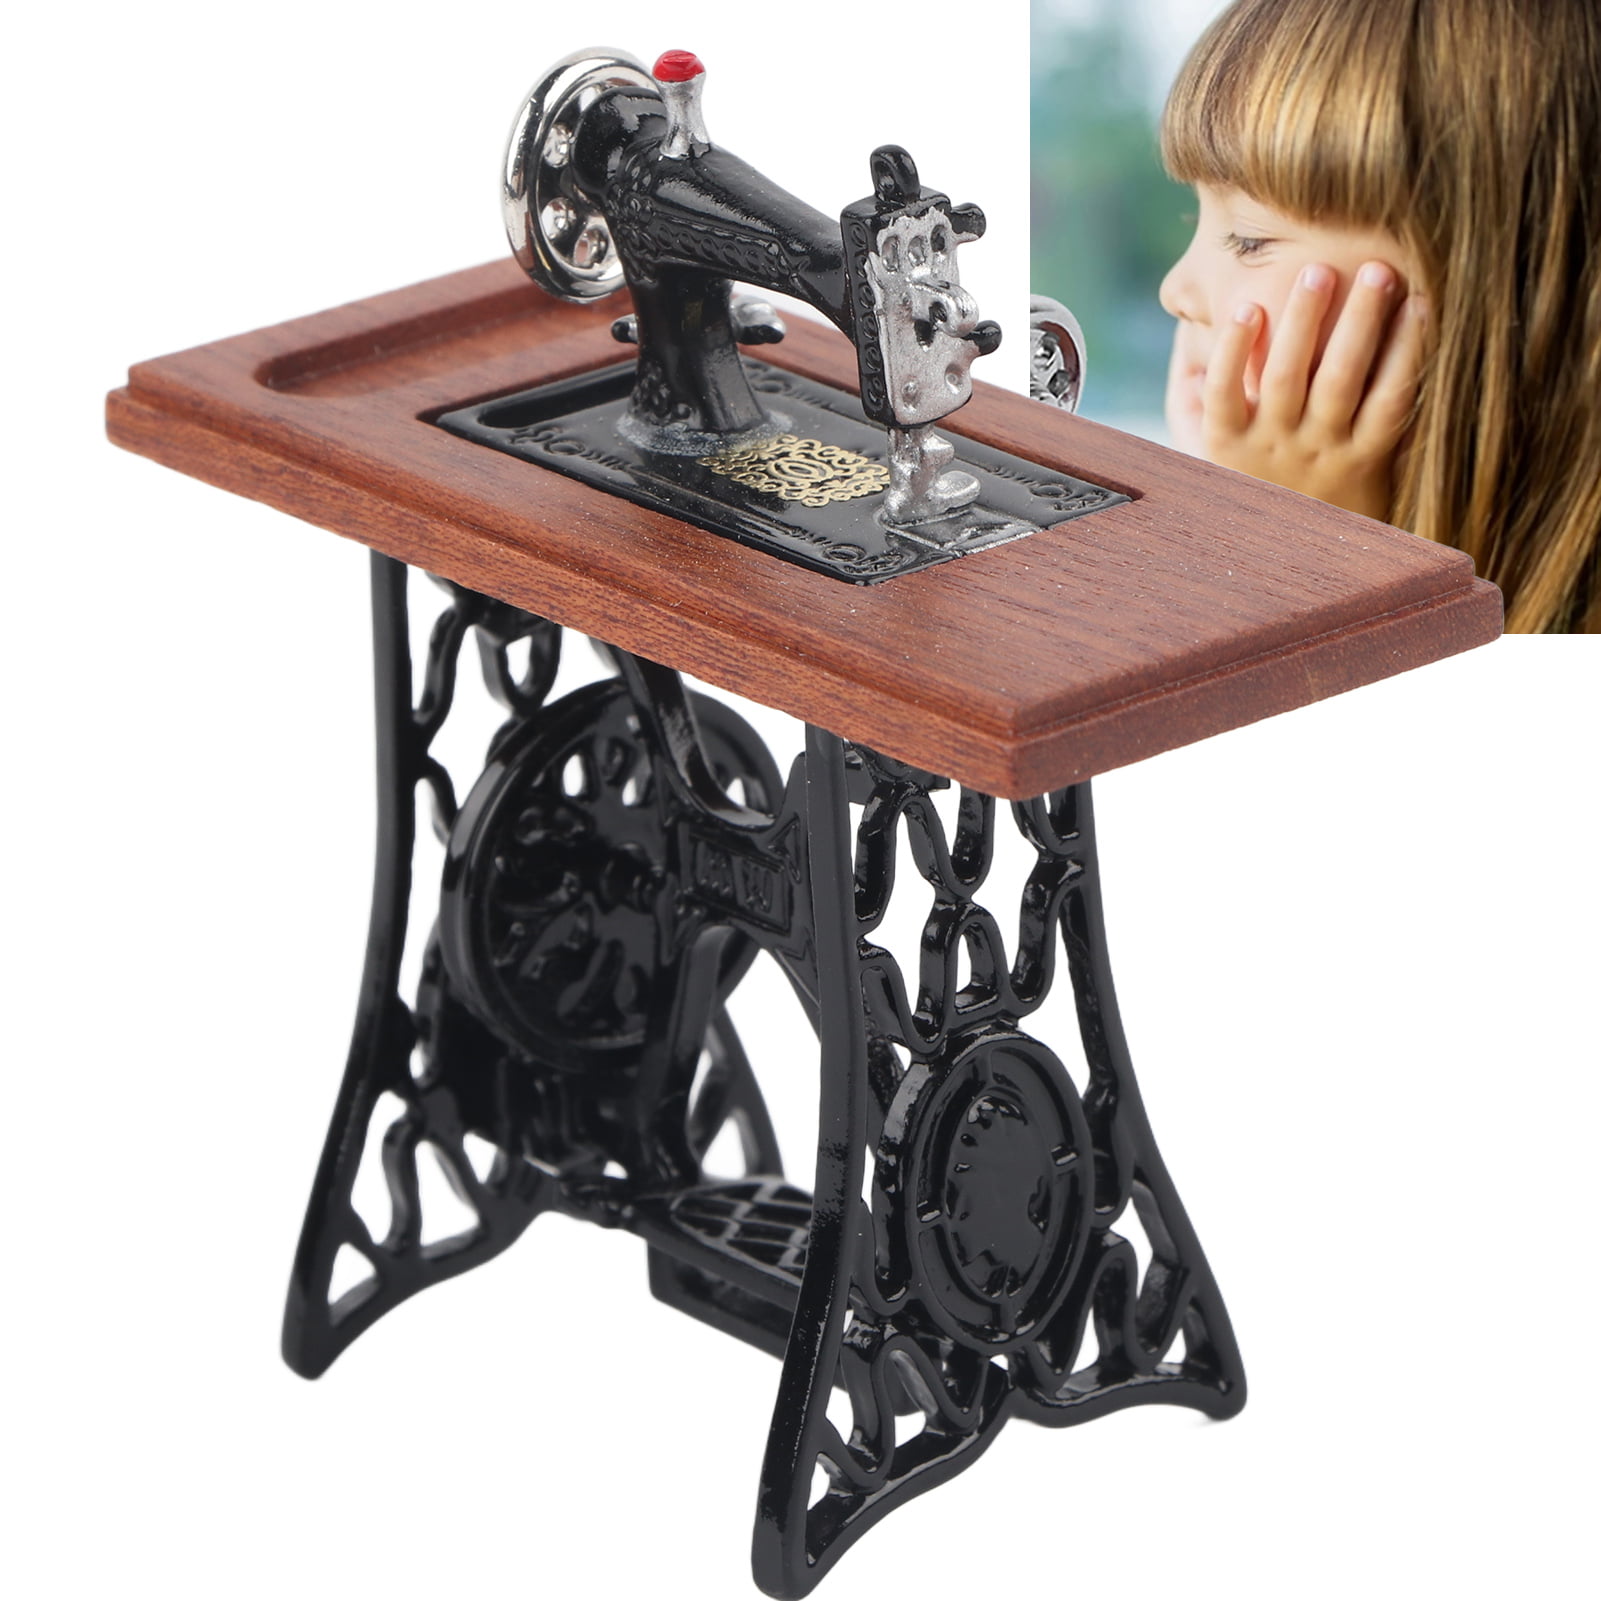 Kids Mini Sewing Machine Toy Design Clothing Toy Can DIY Knitting Machine  Kid Dollhouse Decor Miniature Furniture Toys For Girls